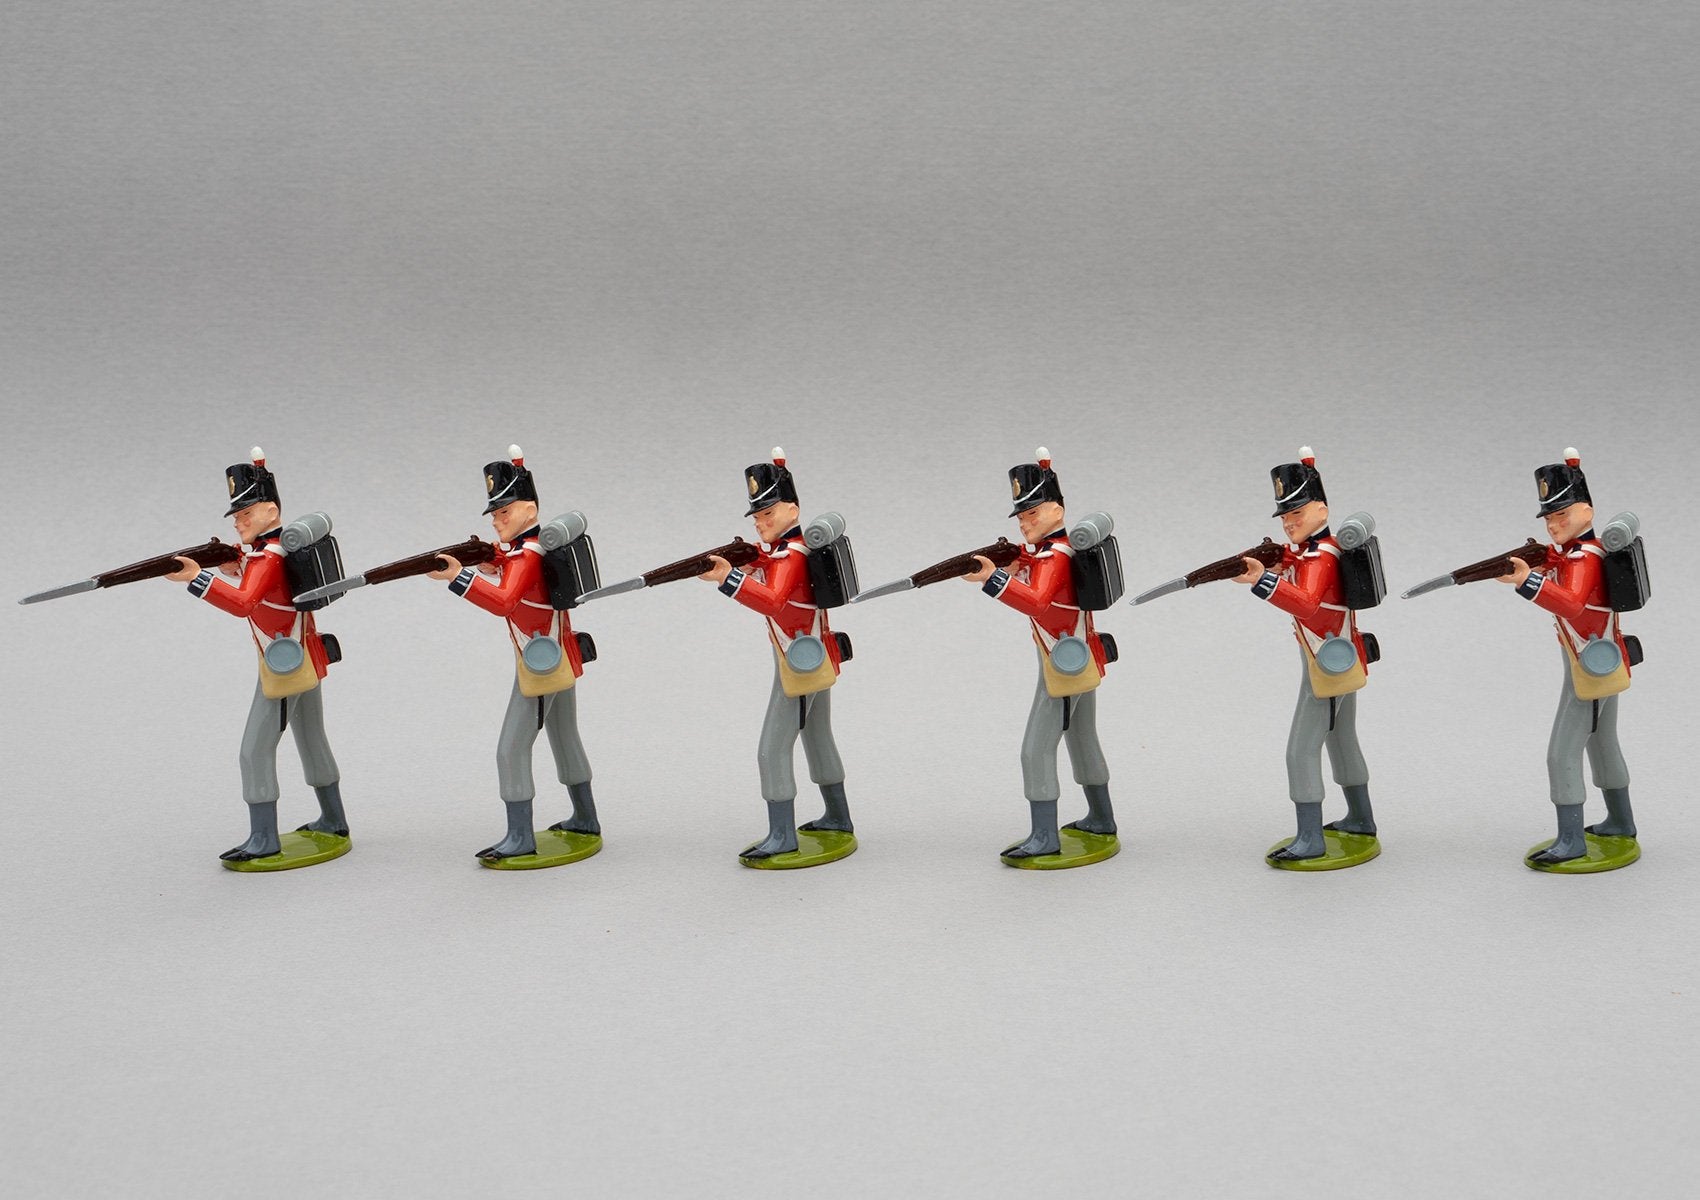 Set 129 1st Foot Guards, Waterloo 1815 | British Infantry | Napoleonic Wars | Six men standing firing as the rear rank of a defensive square. 1st Infantry Division | Waterloo | © Imperial Productions | Sculpt by David Cowe